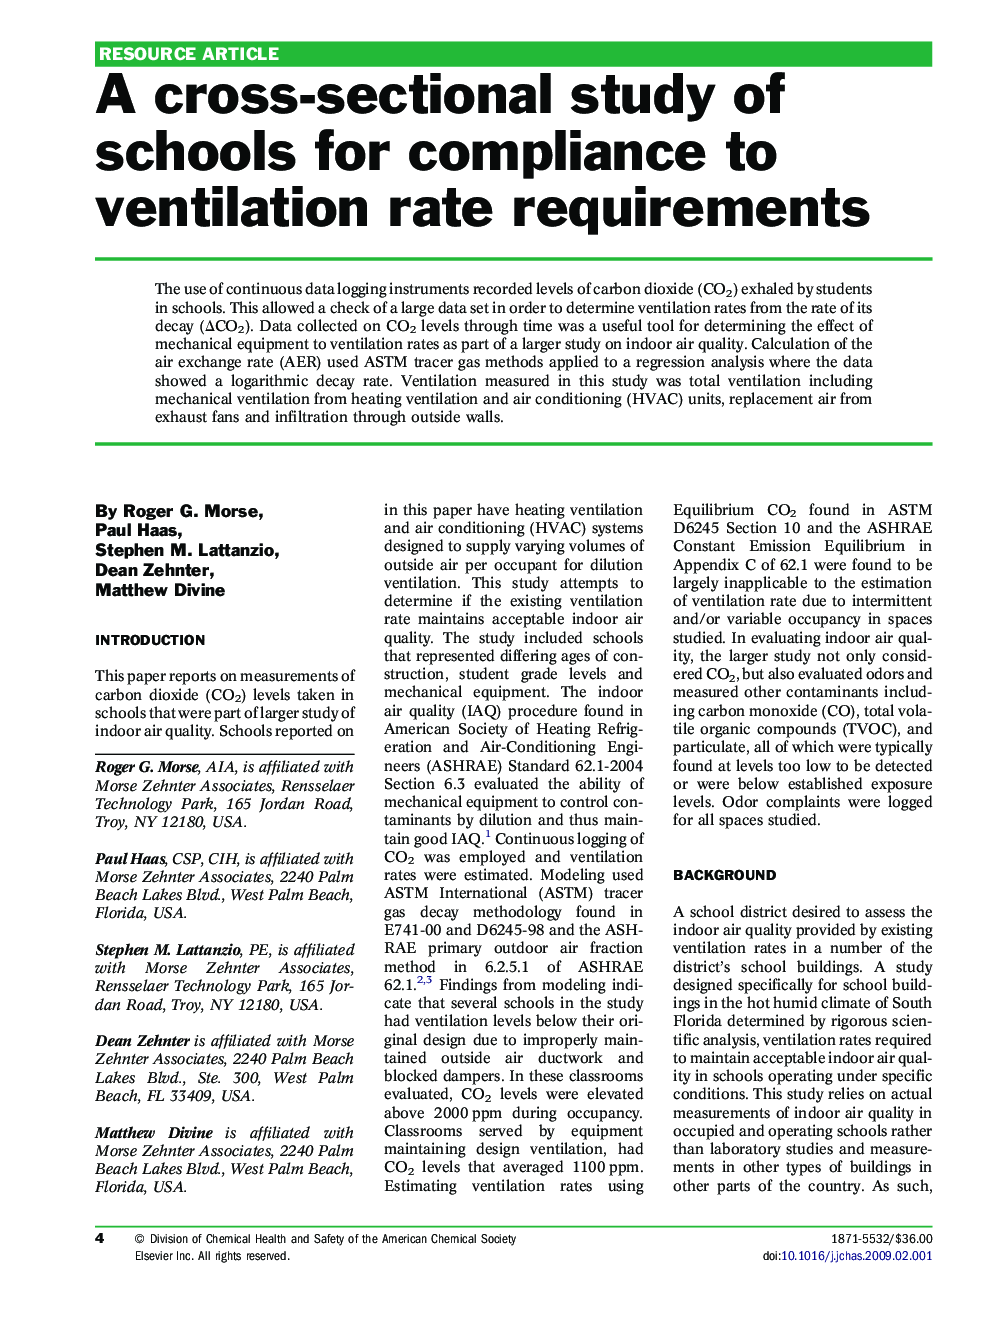 A cross-sectional study of schools for compliance to ventilation rate requirements